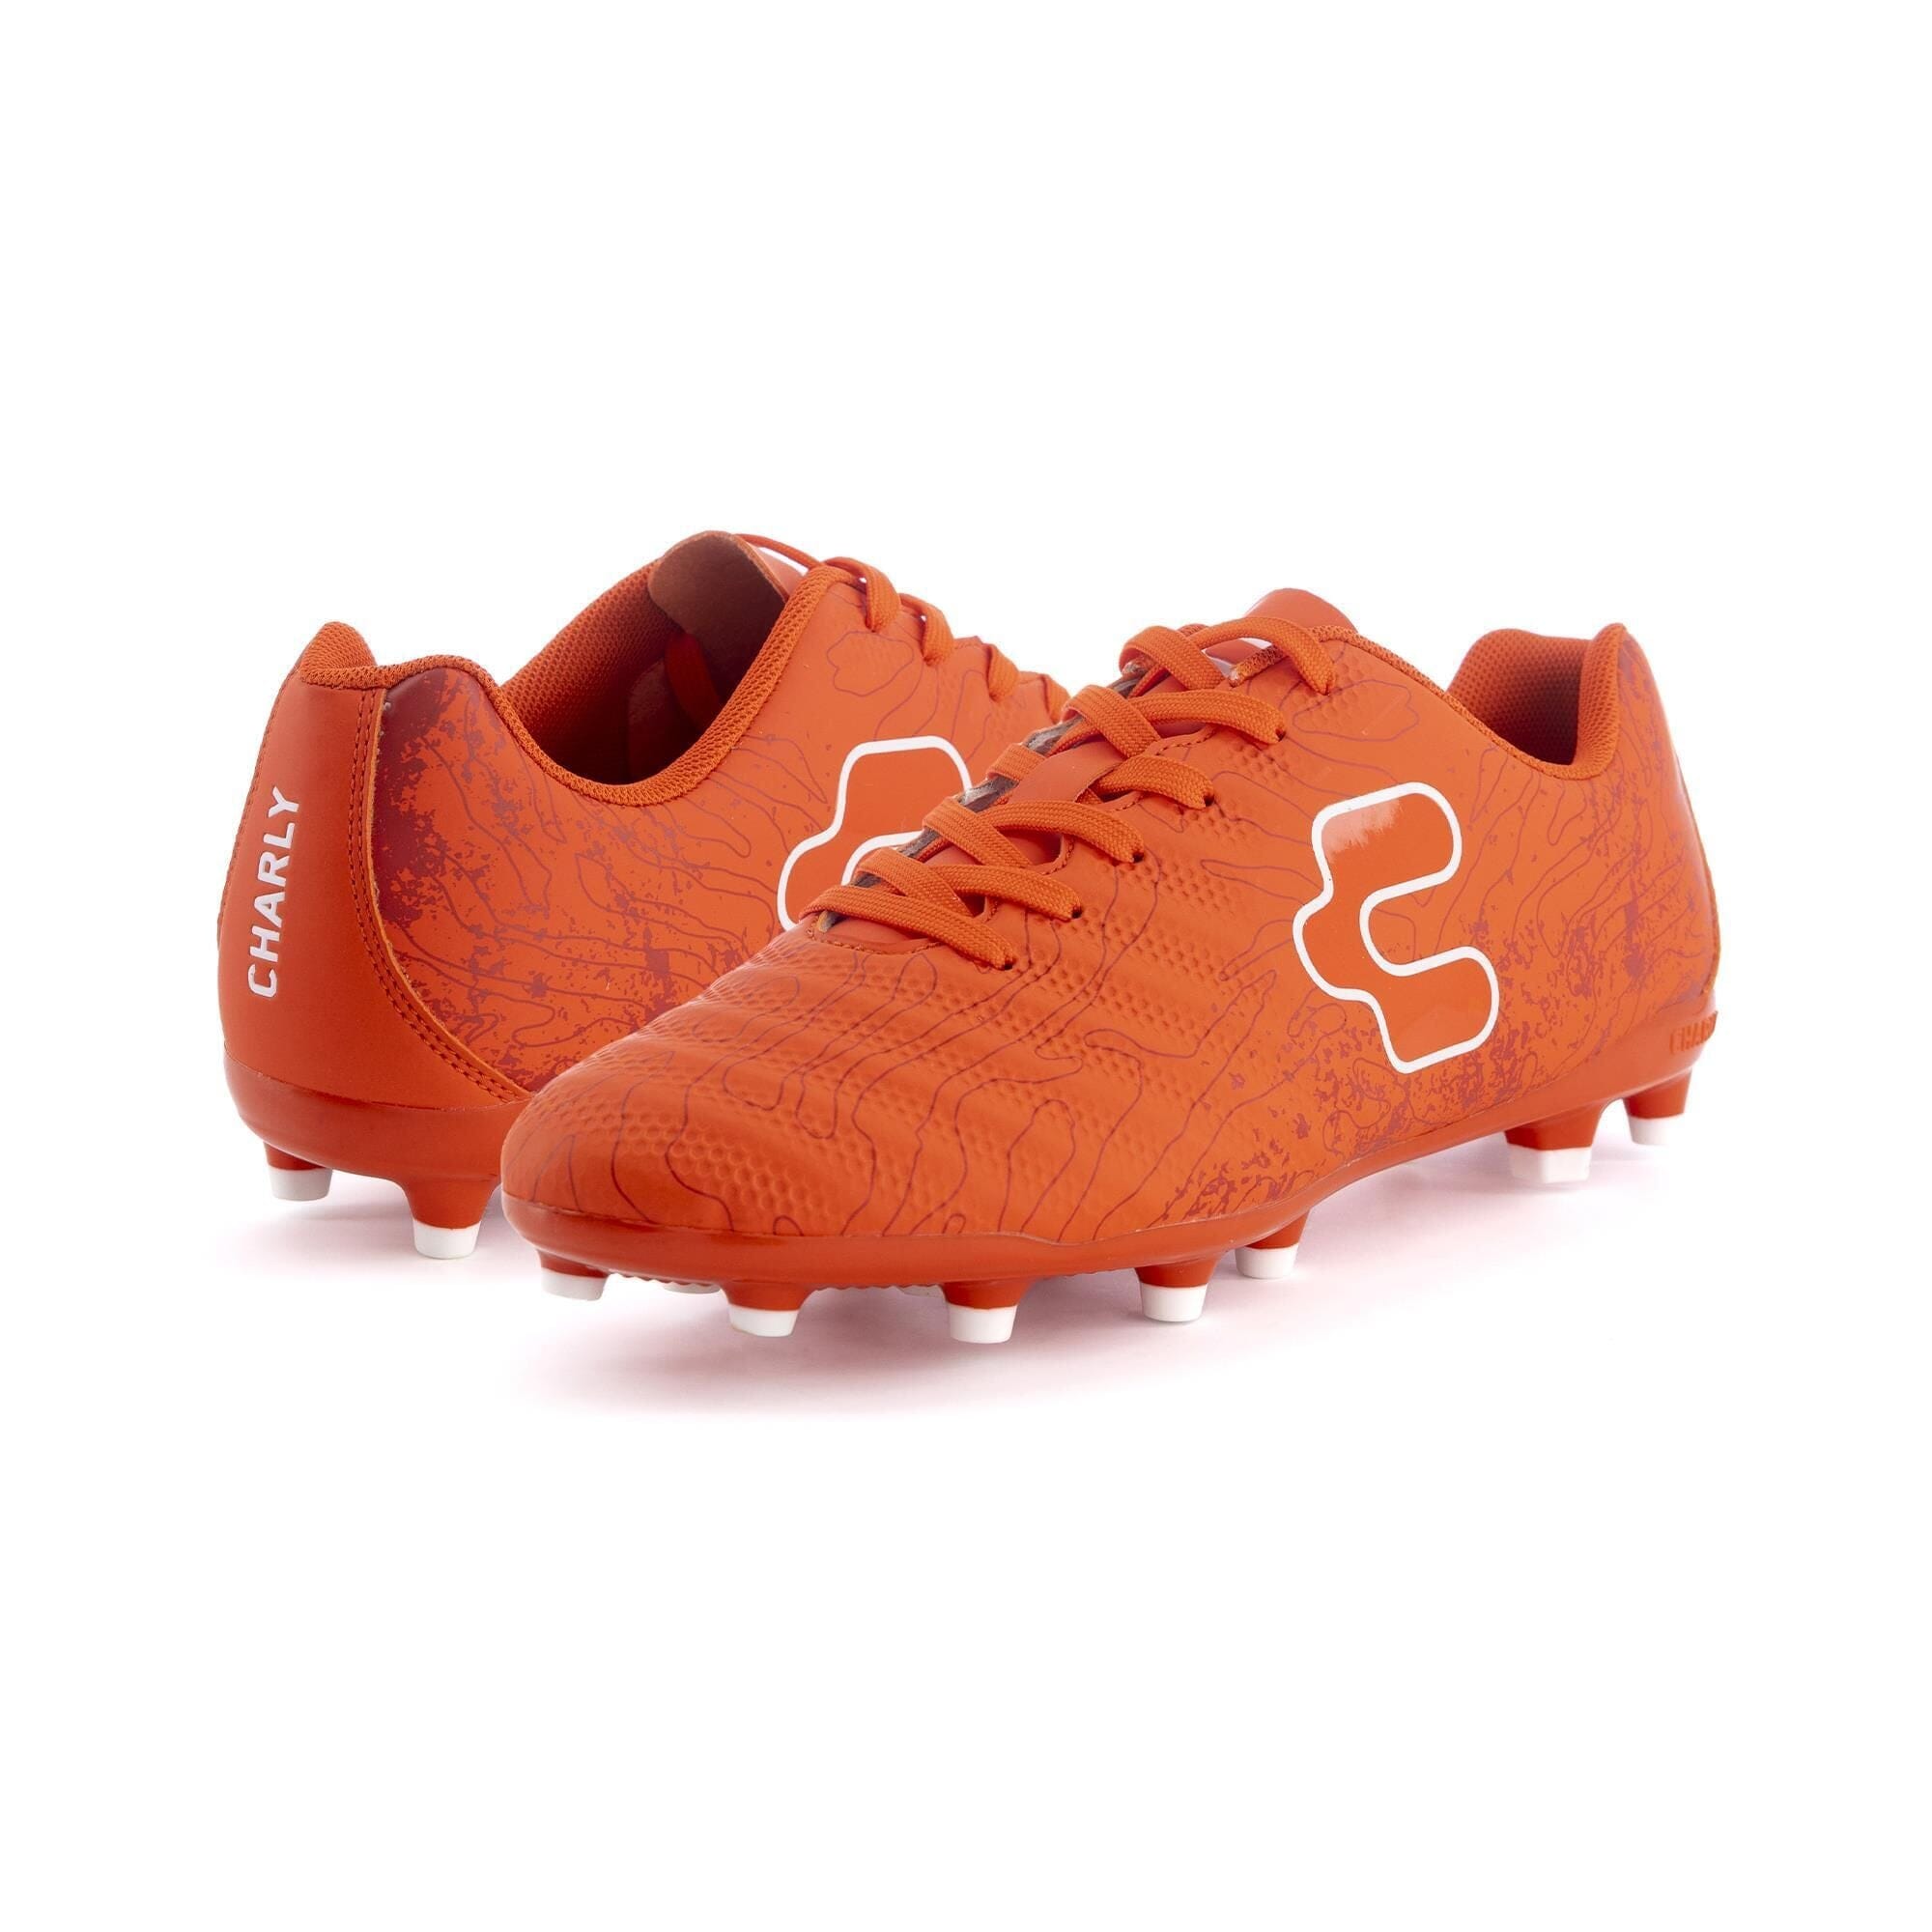 Charly Hotcross 2.0 Firm Ground Soccer Cleats | 1098597002 Cleats Charly 